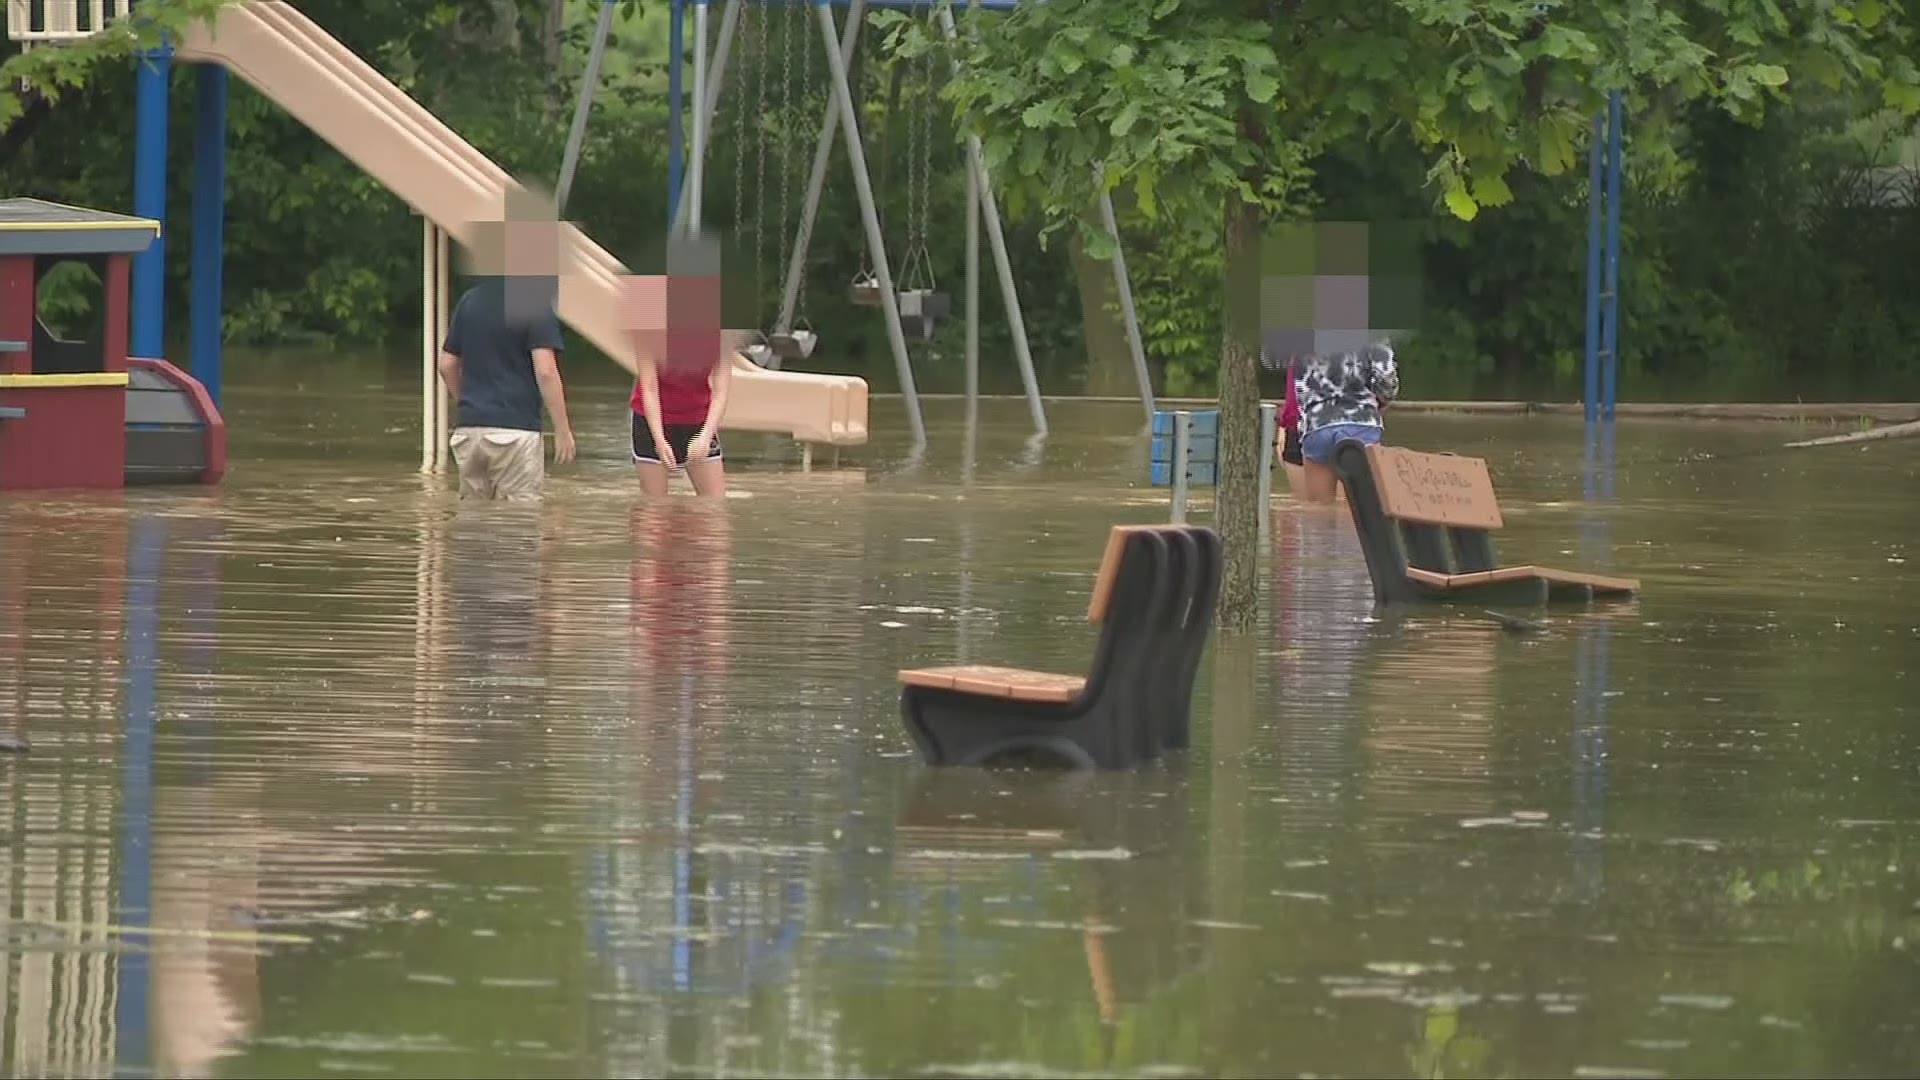 As the skies finally start to clear up, many people may be tempted to play or swim in flood waters. Our Chief Meteorologist Betsy Kling verifies whether that is safe or not.